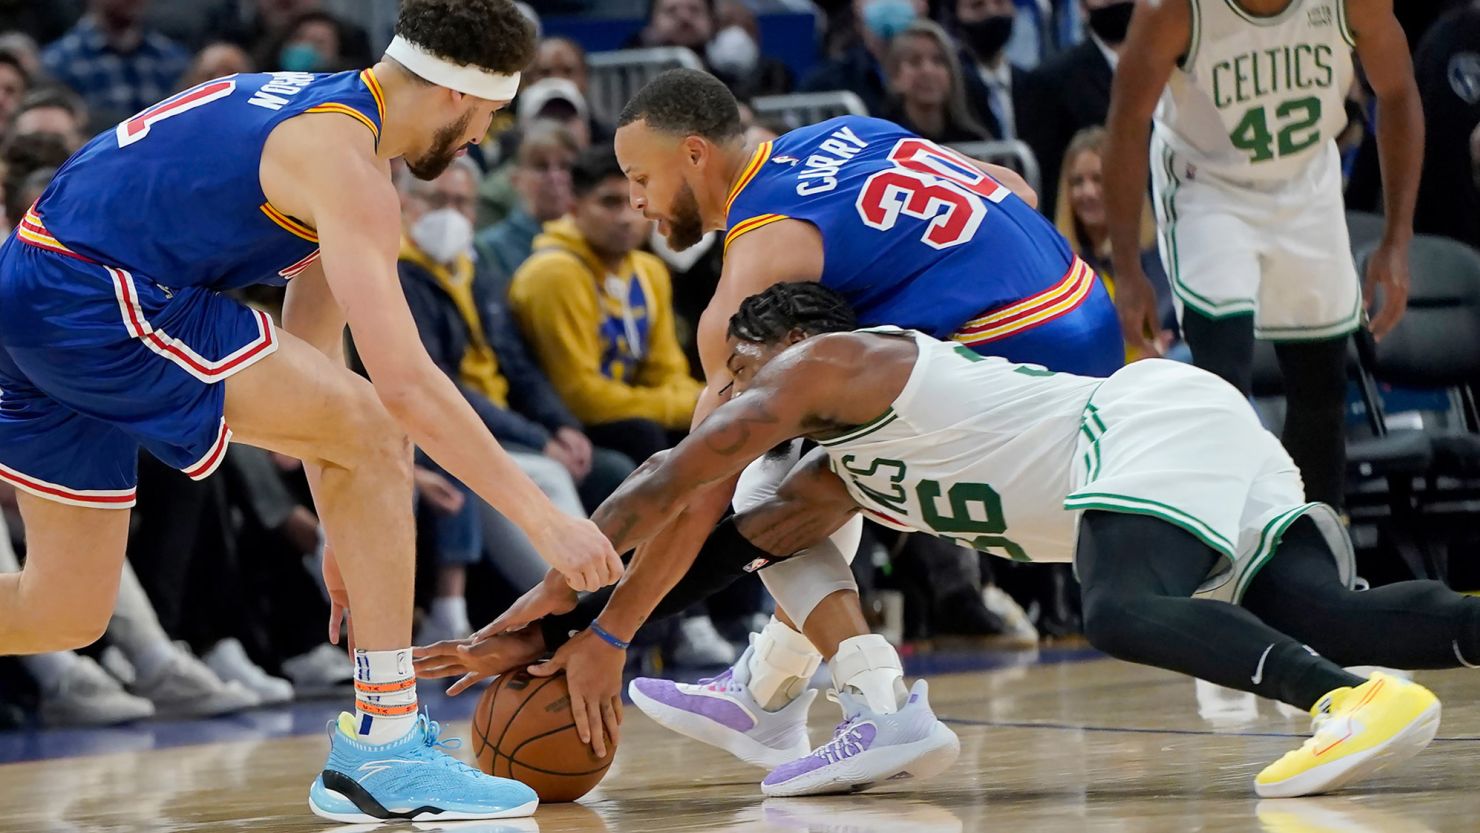 Marcus Smart reaches for the ball against Steph Curry during the first half of the game between the Warriors and the Celtics.